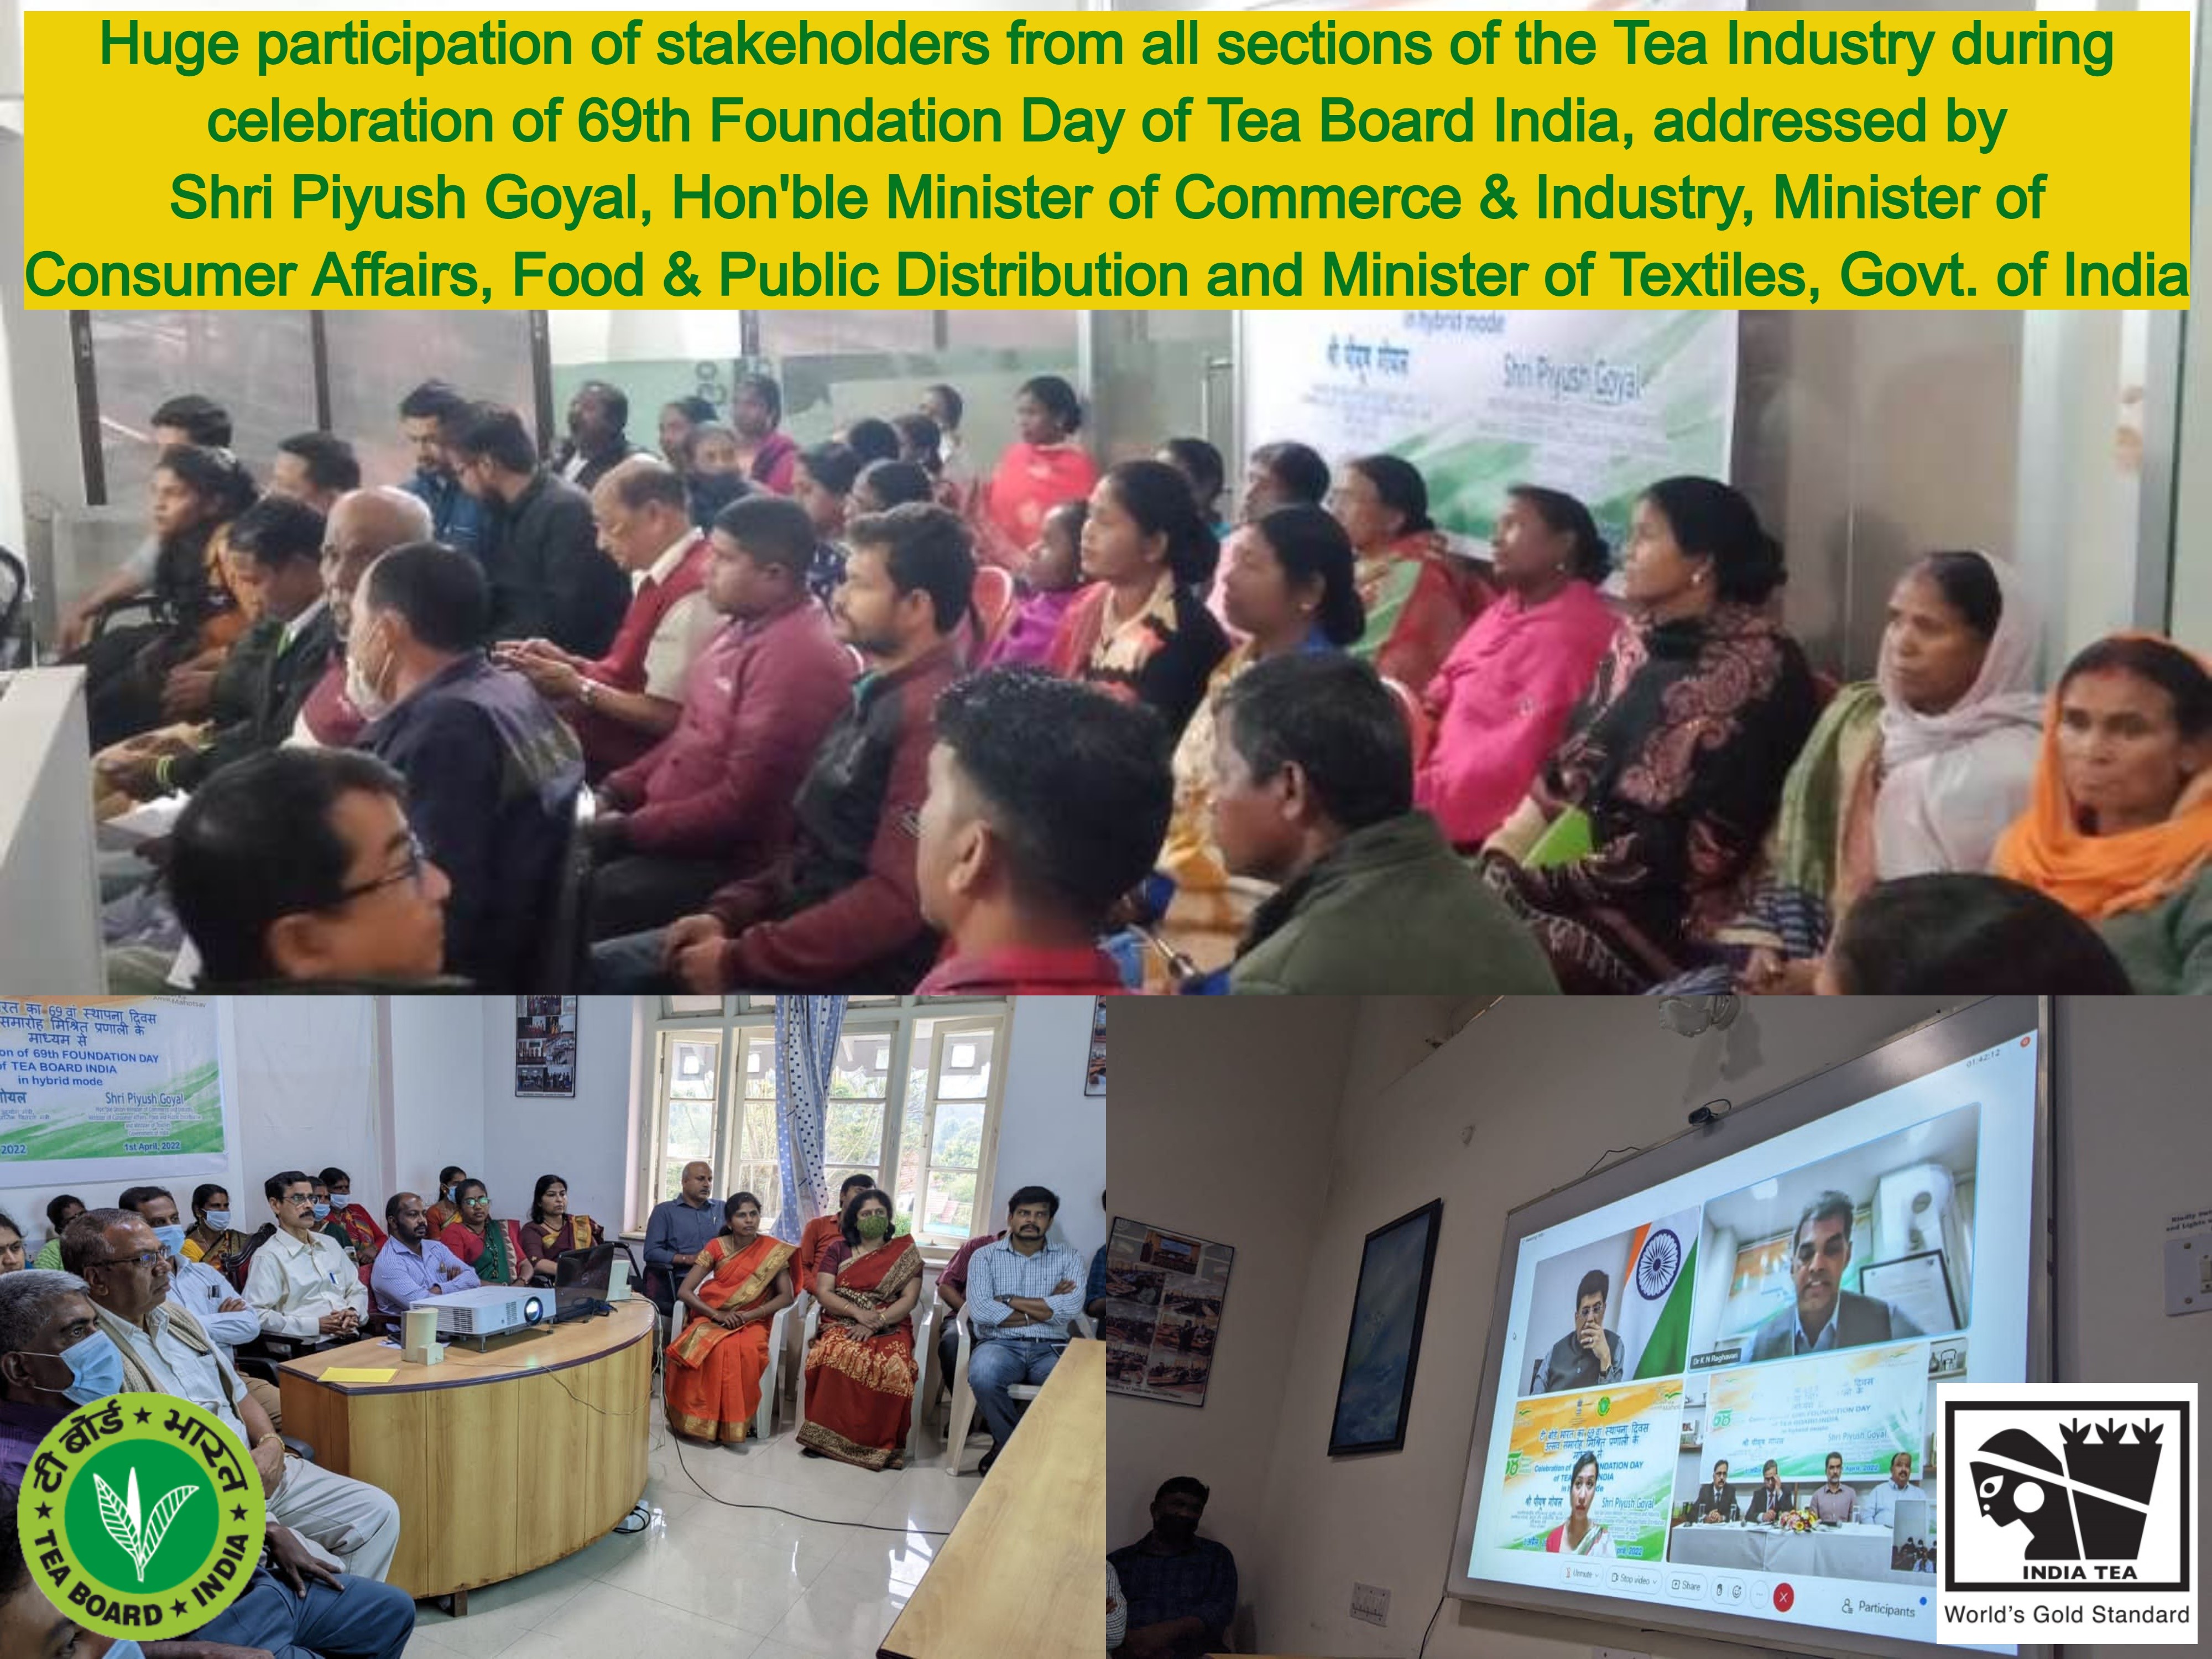 Huge participation of stakeholders from all sections of the Tea Industry during celebration of 69th Foundation Day of Tea Board India, addressed by Shri Piyush Goyal, Hon'ble Minister of Commerce & Industry, Minister of Consumer Affairs, Food & Public Distribution and Minister of Textiles, Govt. of India